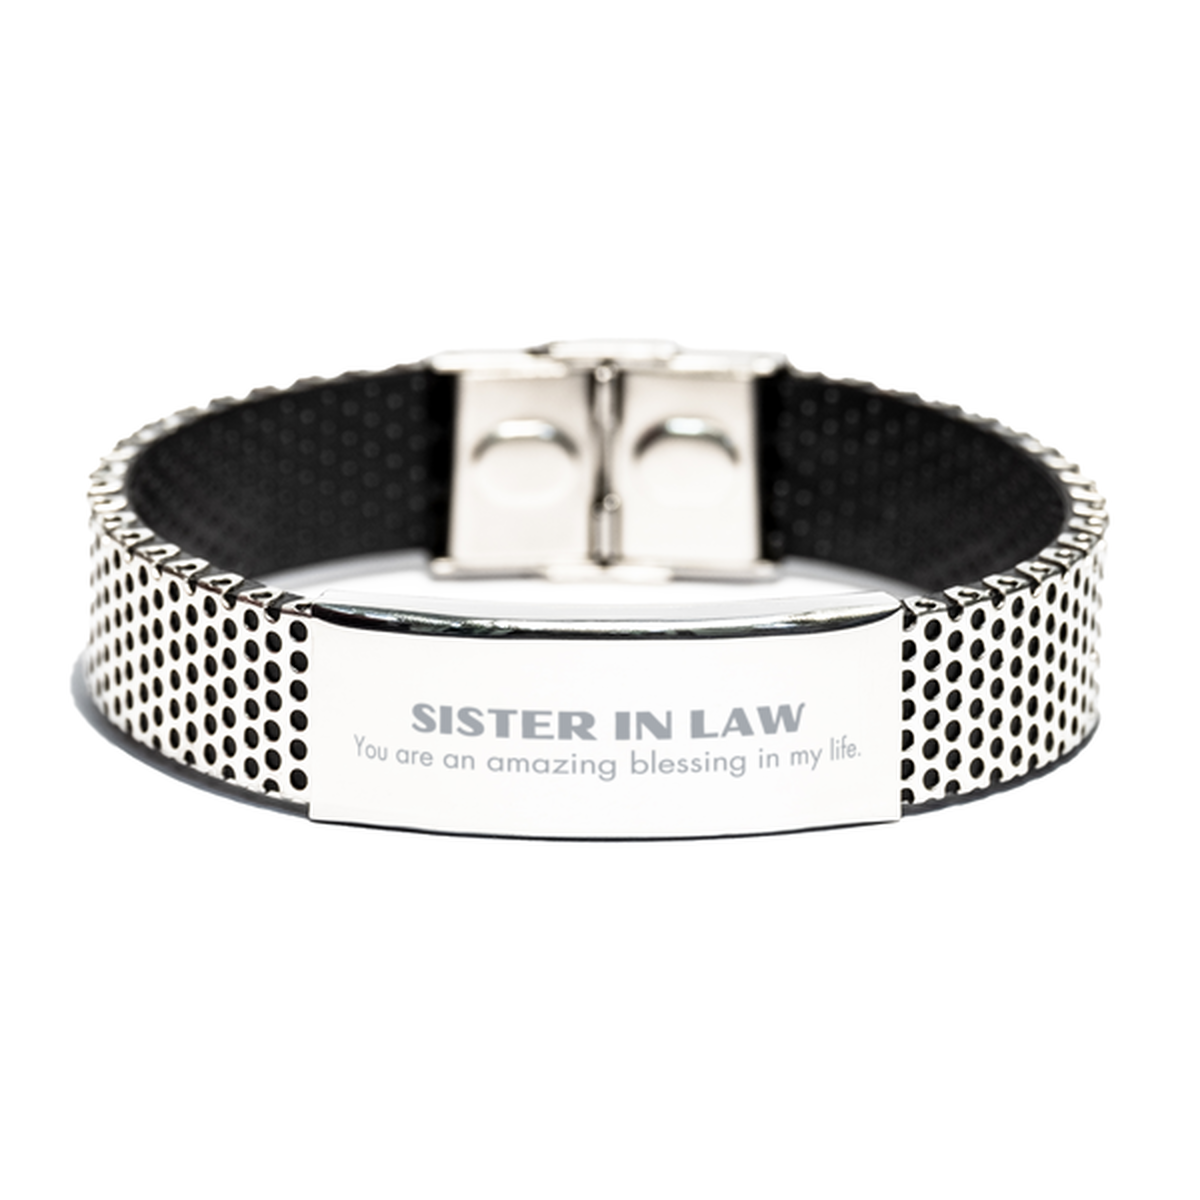 Sister In Law Stainless Steel Bracelet, You are an amazing blessing in my life, Thank You Gifts For Sister In Law, Inspirational Birthday Christmas Unique Gifts For Sister In Law